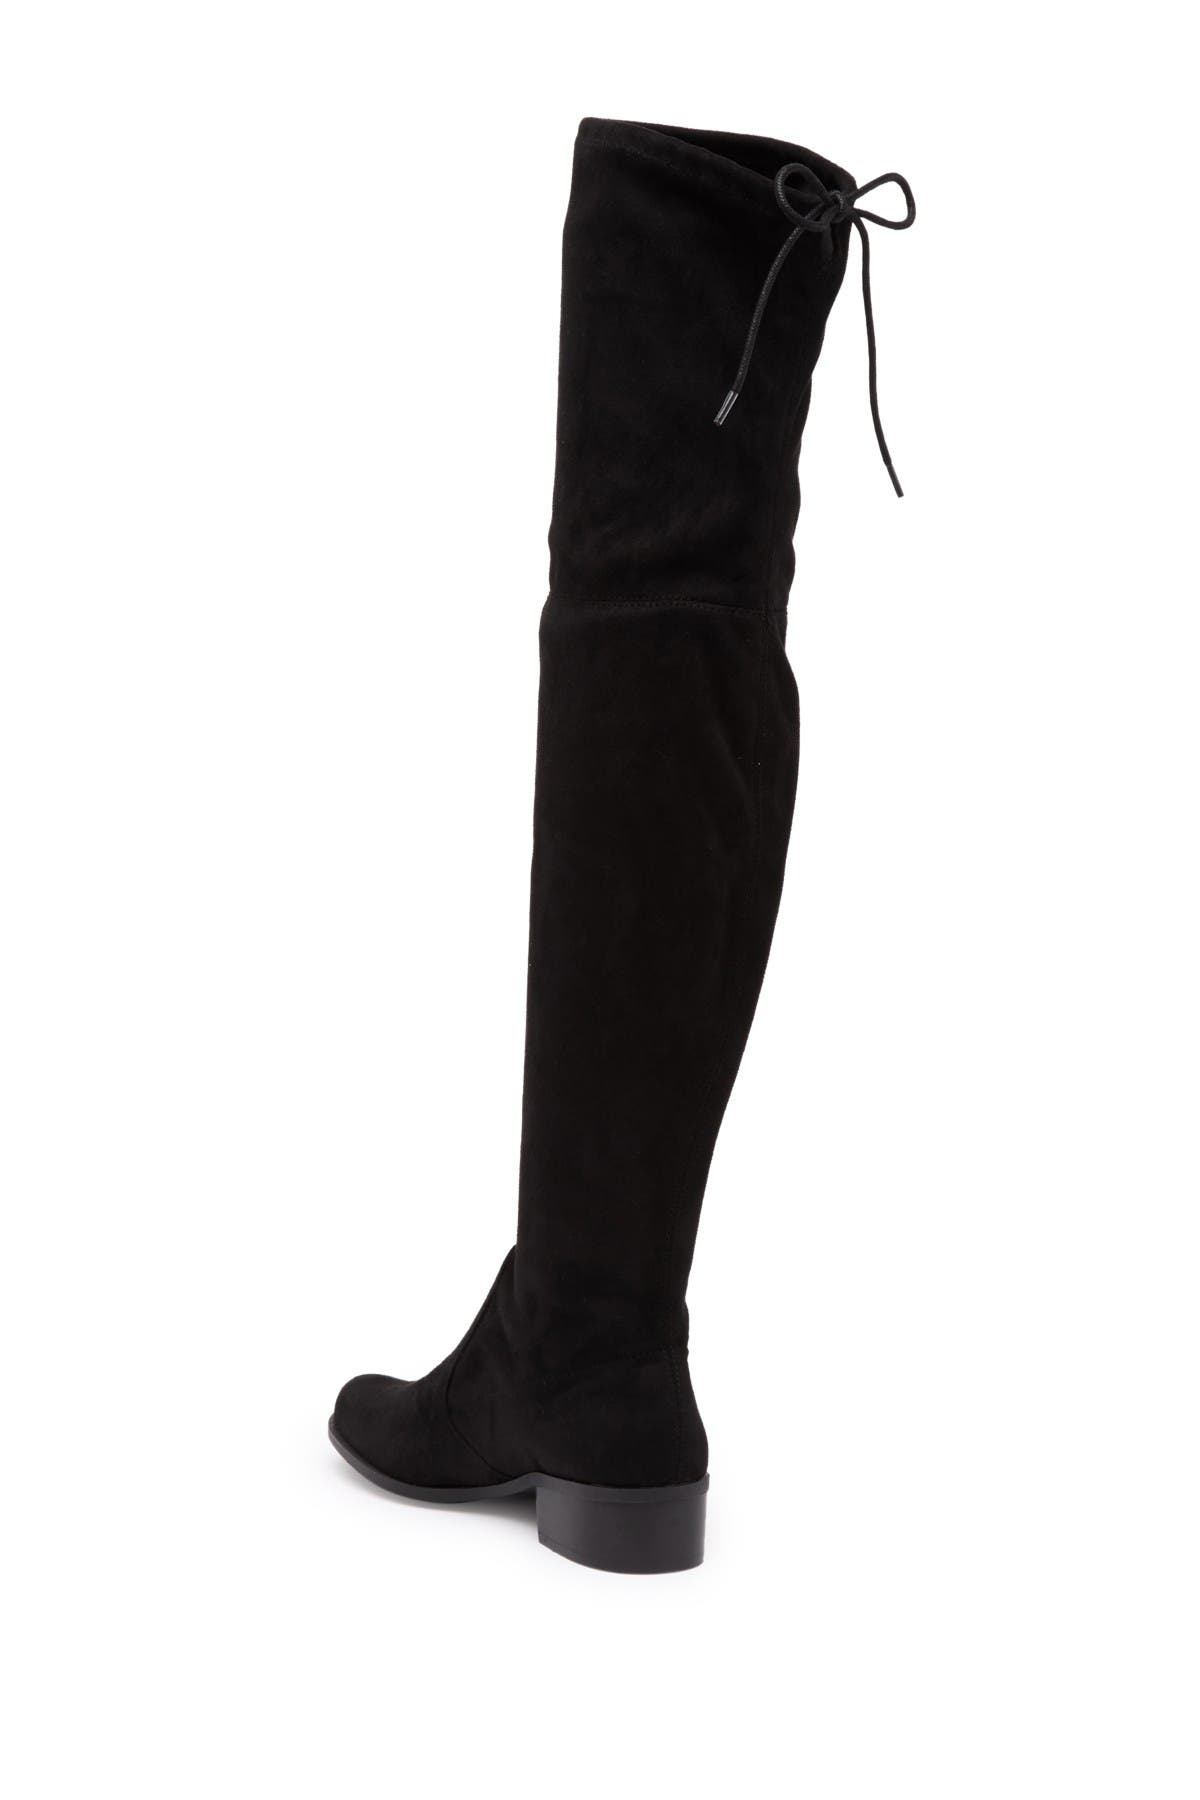 charles by charles david wide calf boots